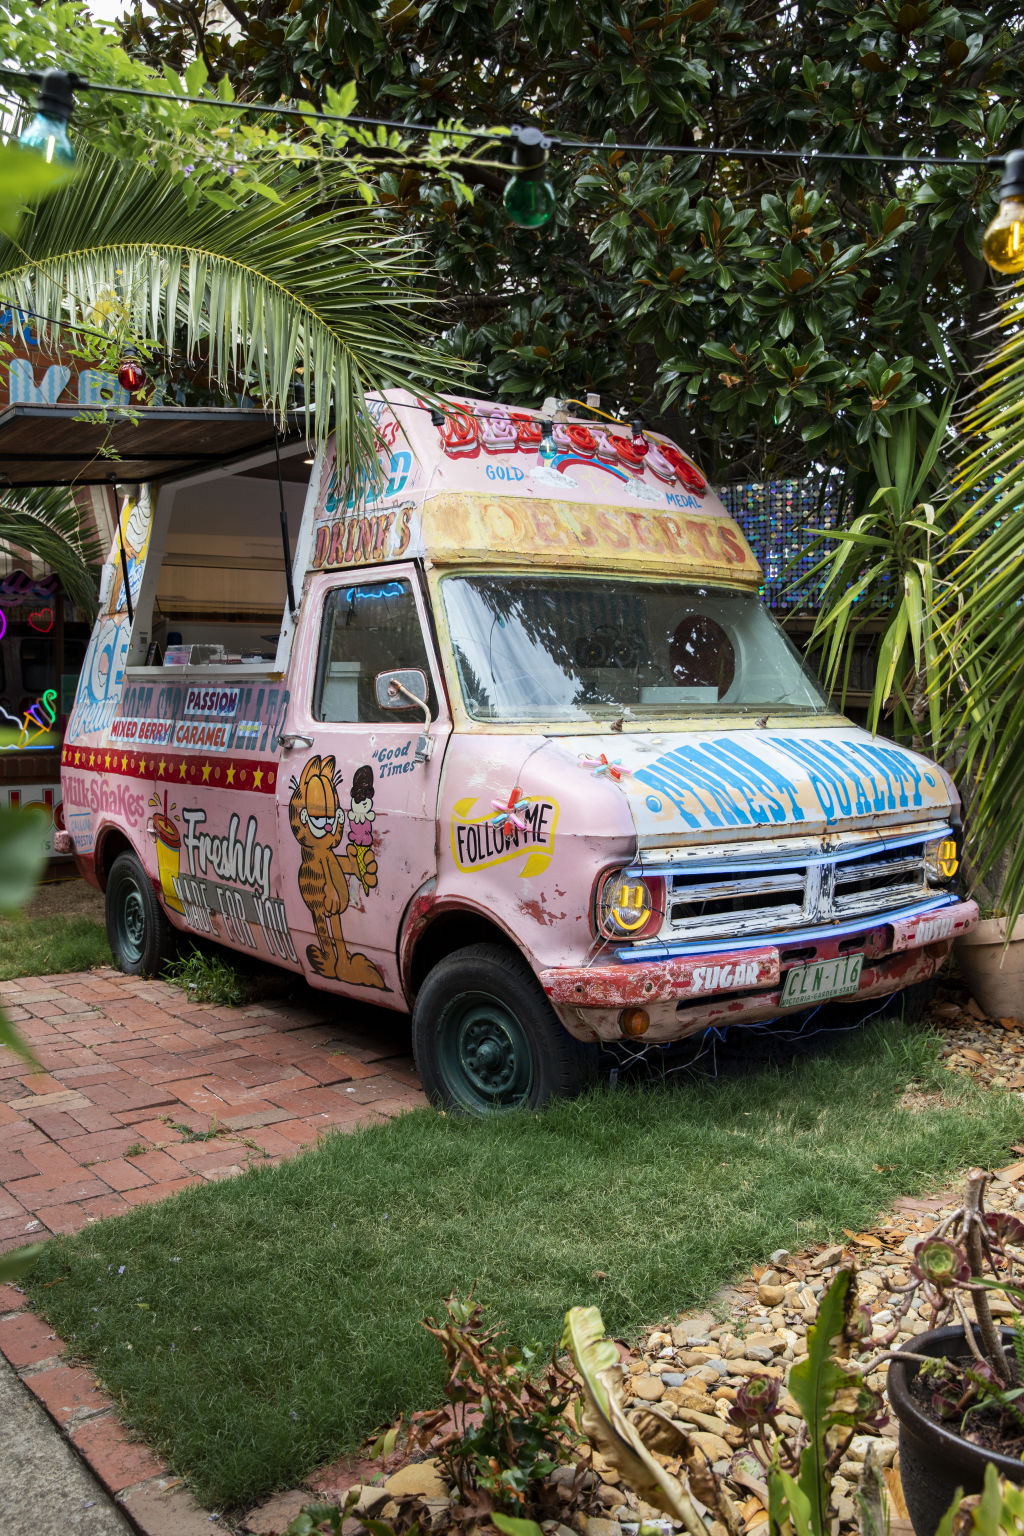 No need for Mr Whippy here. The Jarvis' have their own ice cream truck. Photo: Charlie Kinross